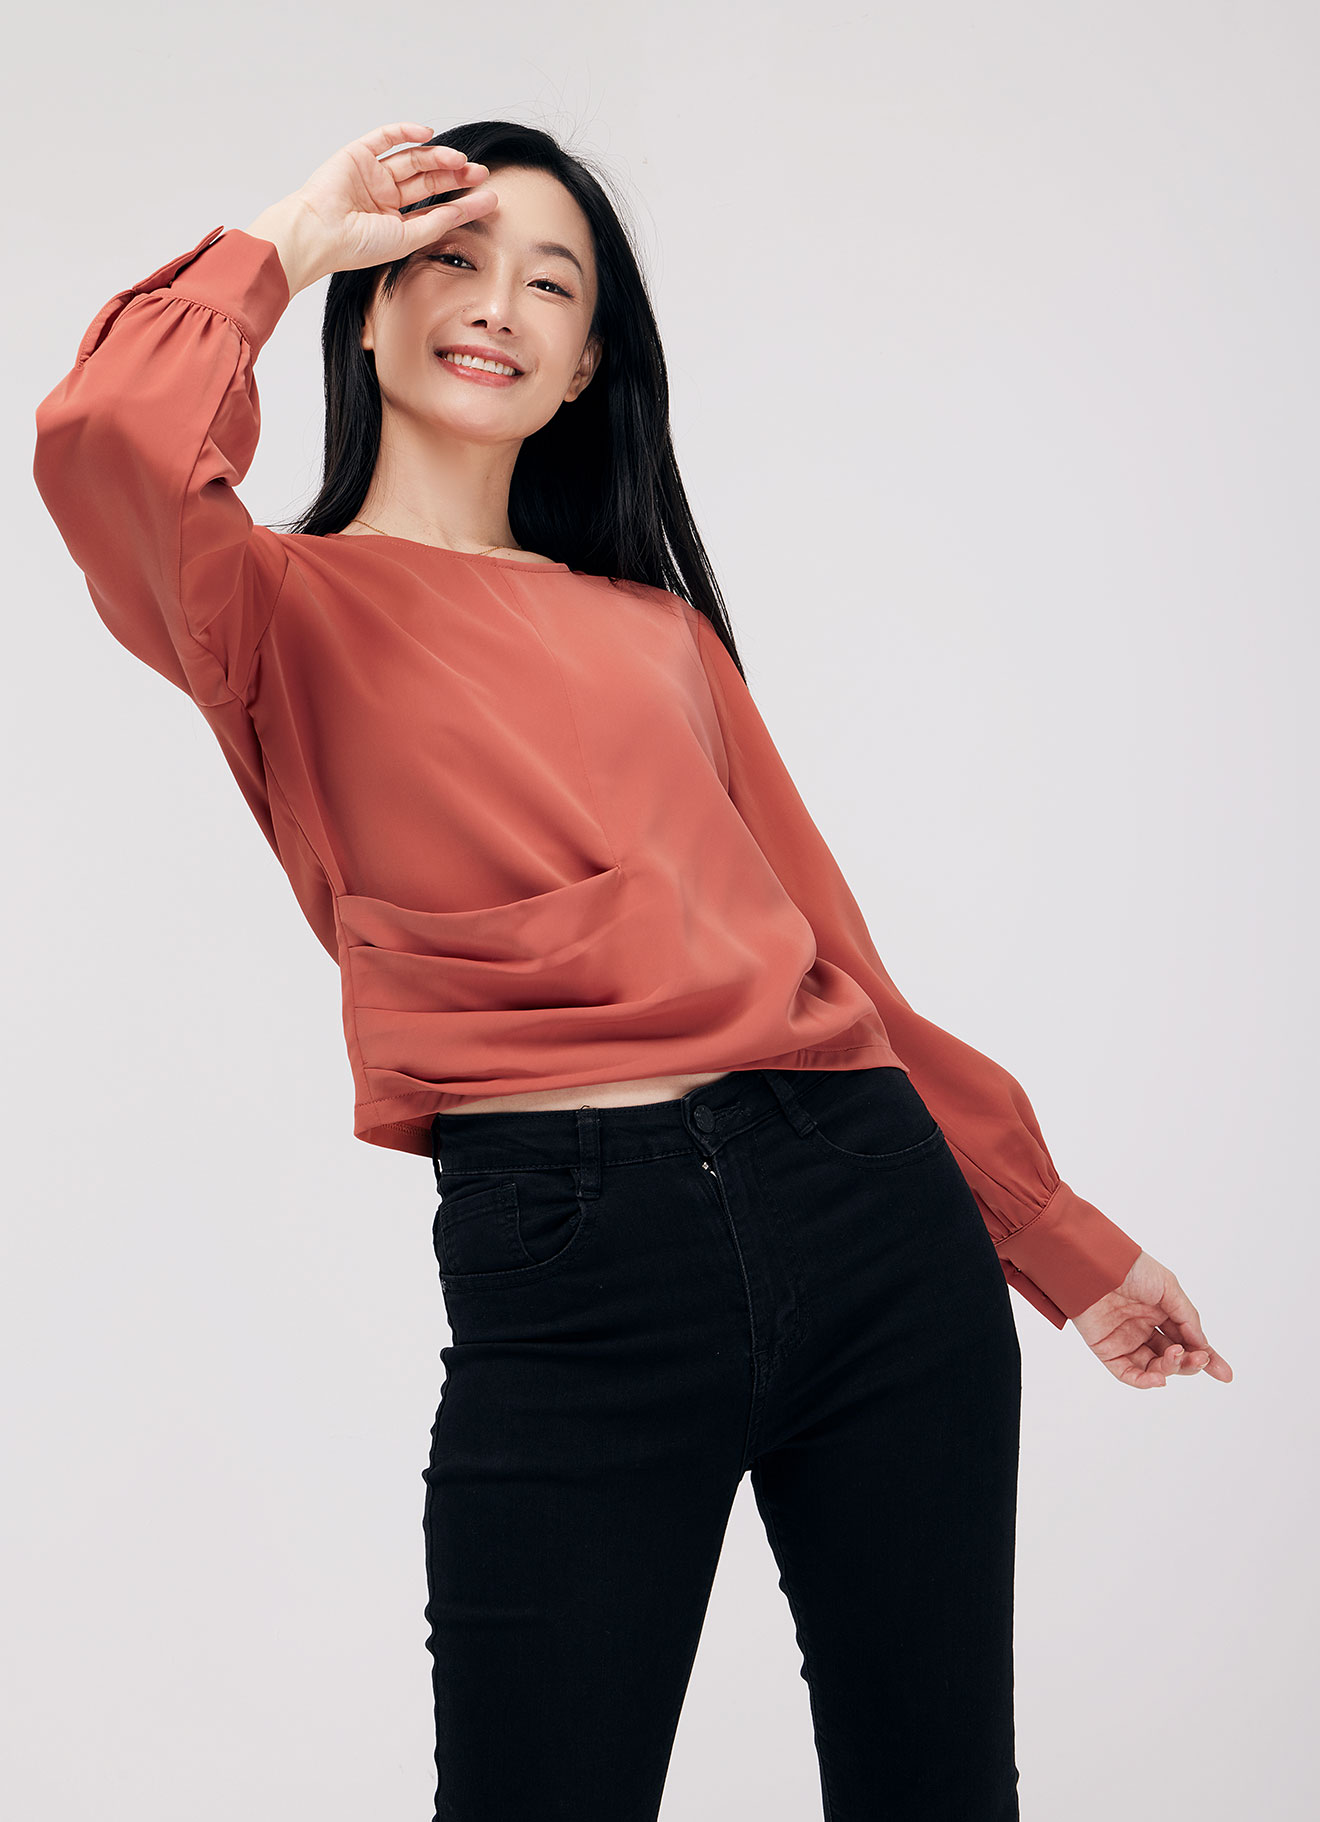 Ginger-Spice by Long Sleeve Top